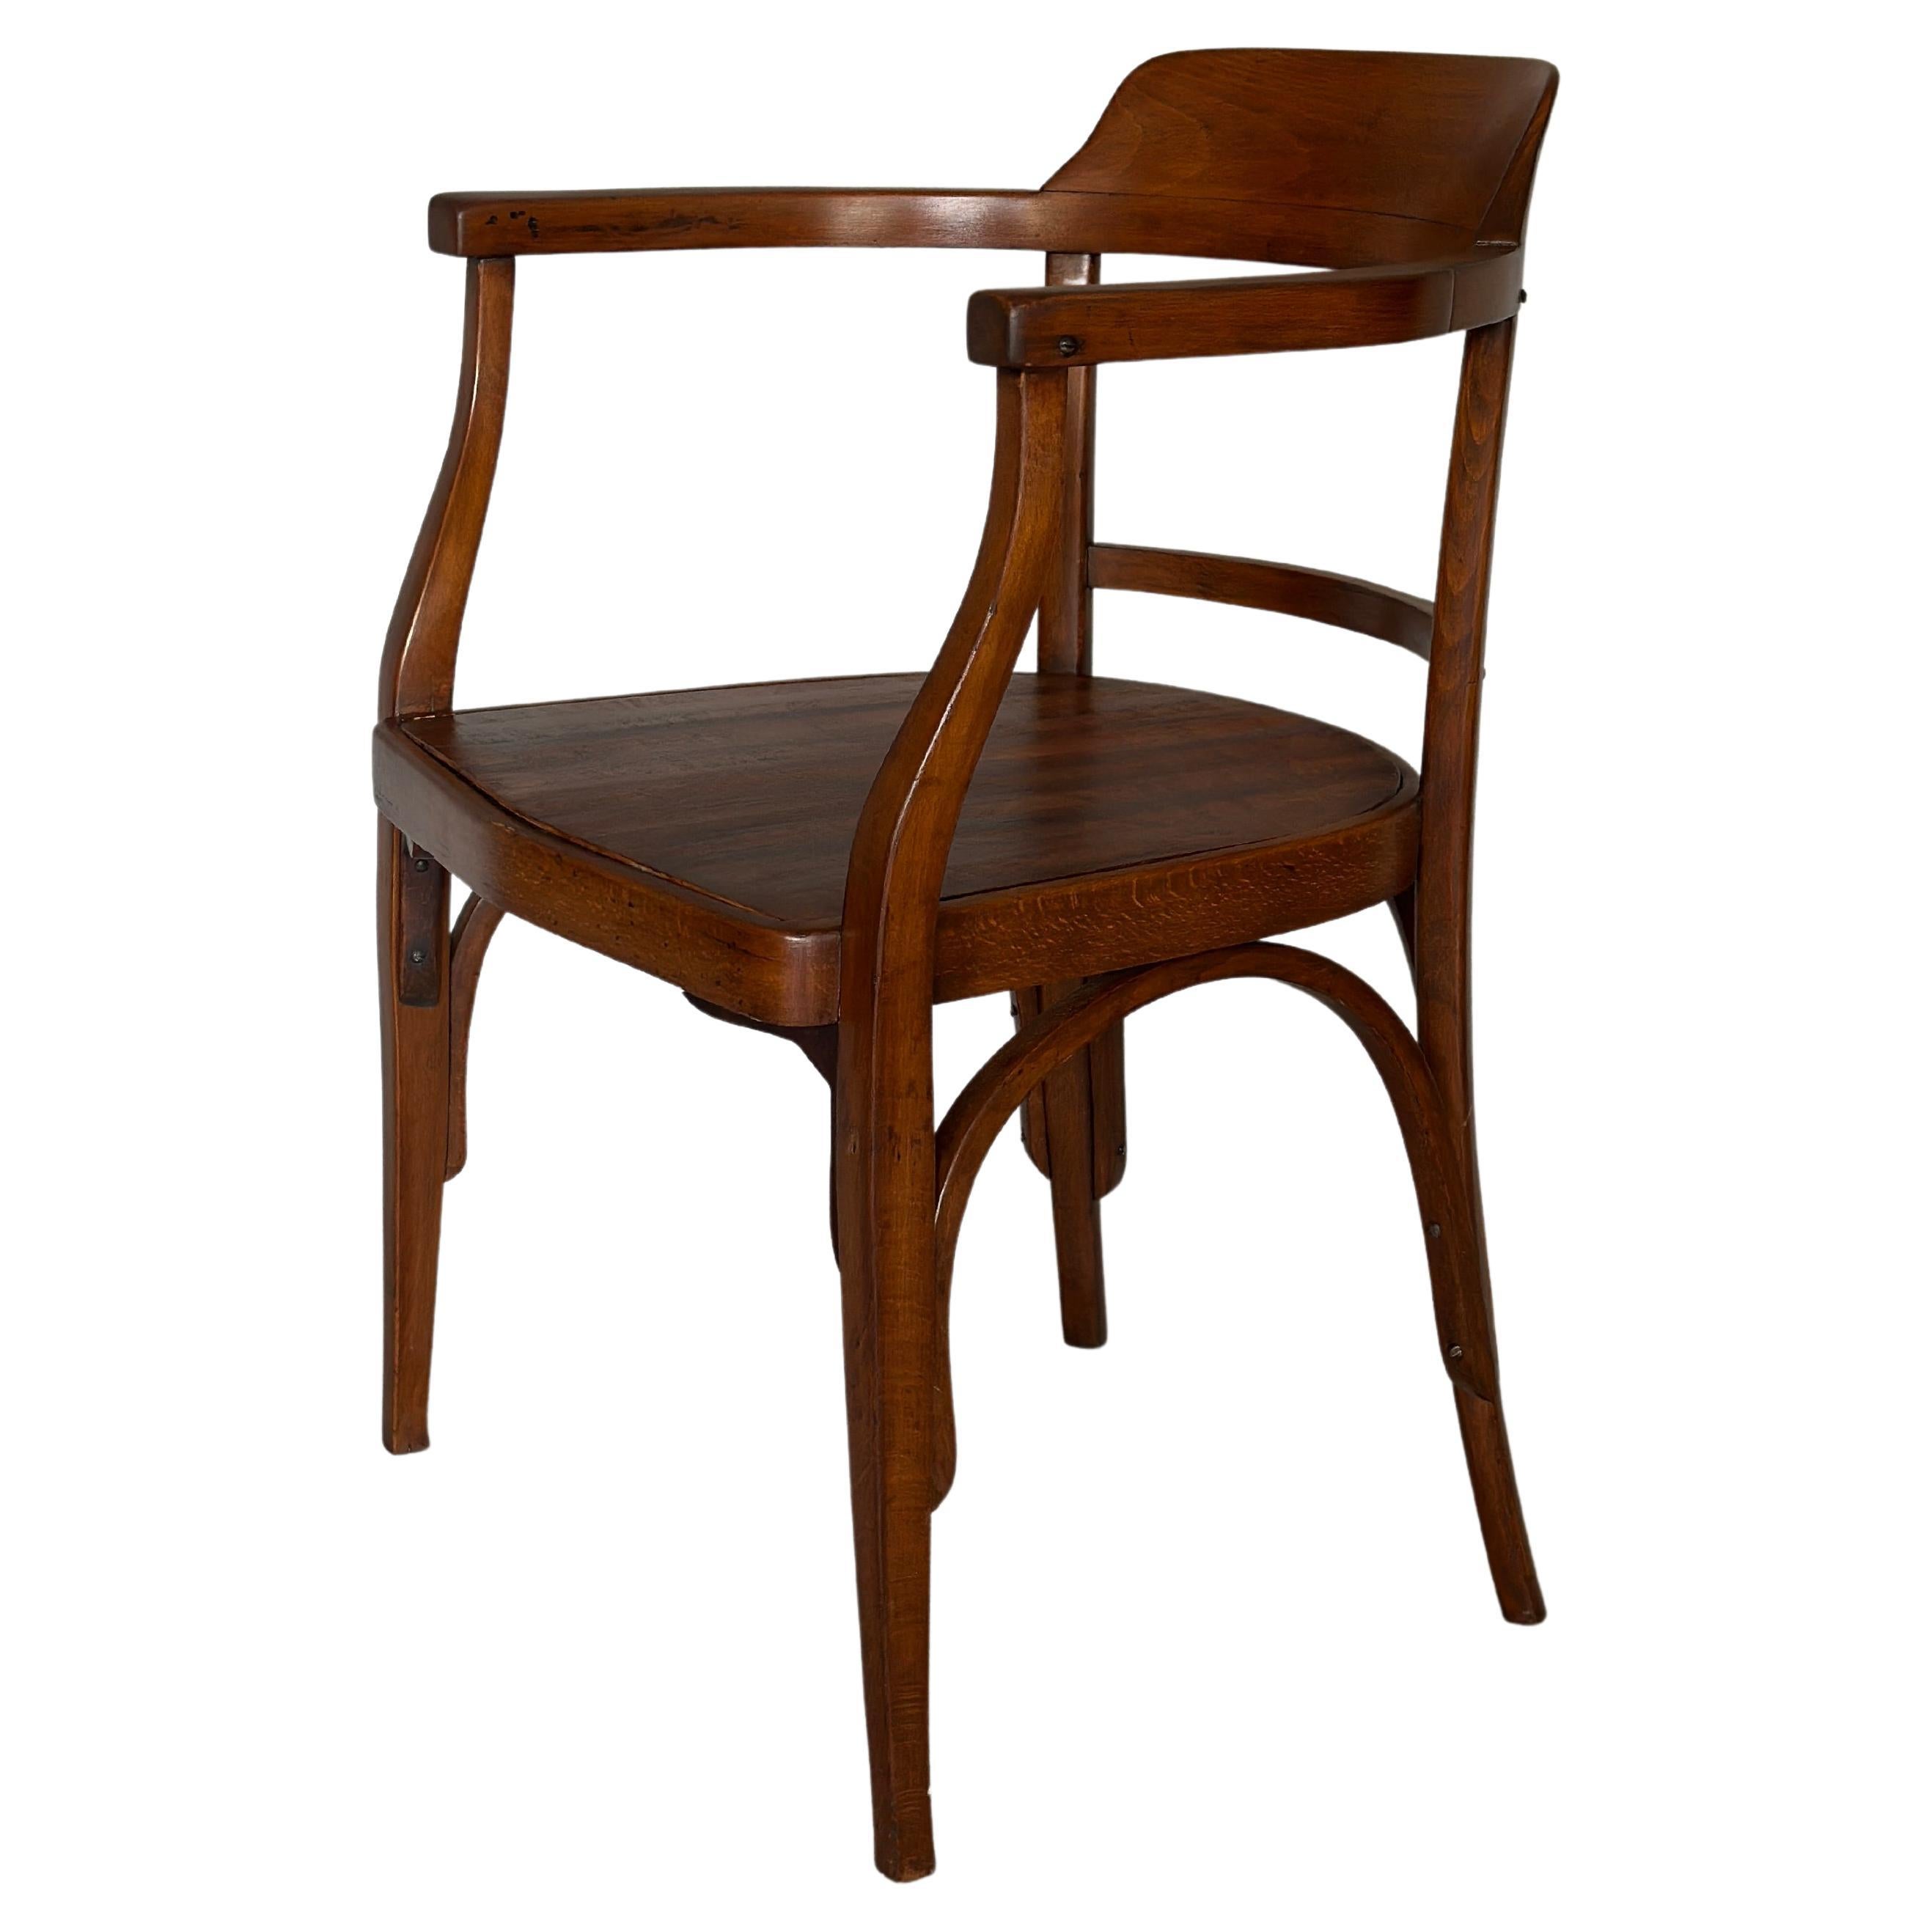 J & J Kohn Chair 714 by Otto Wagner, 1920s For Sale